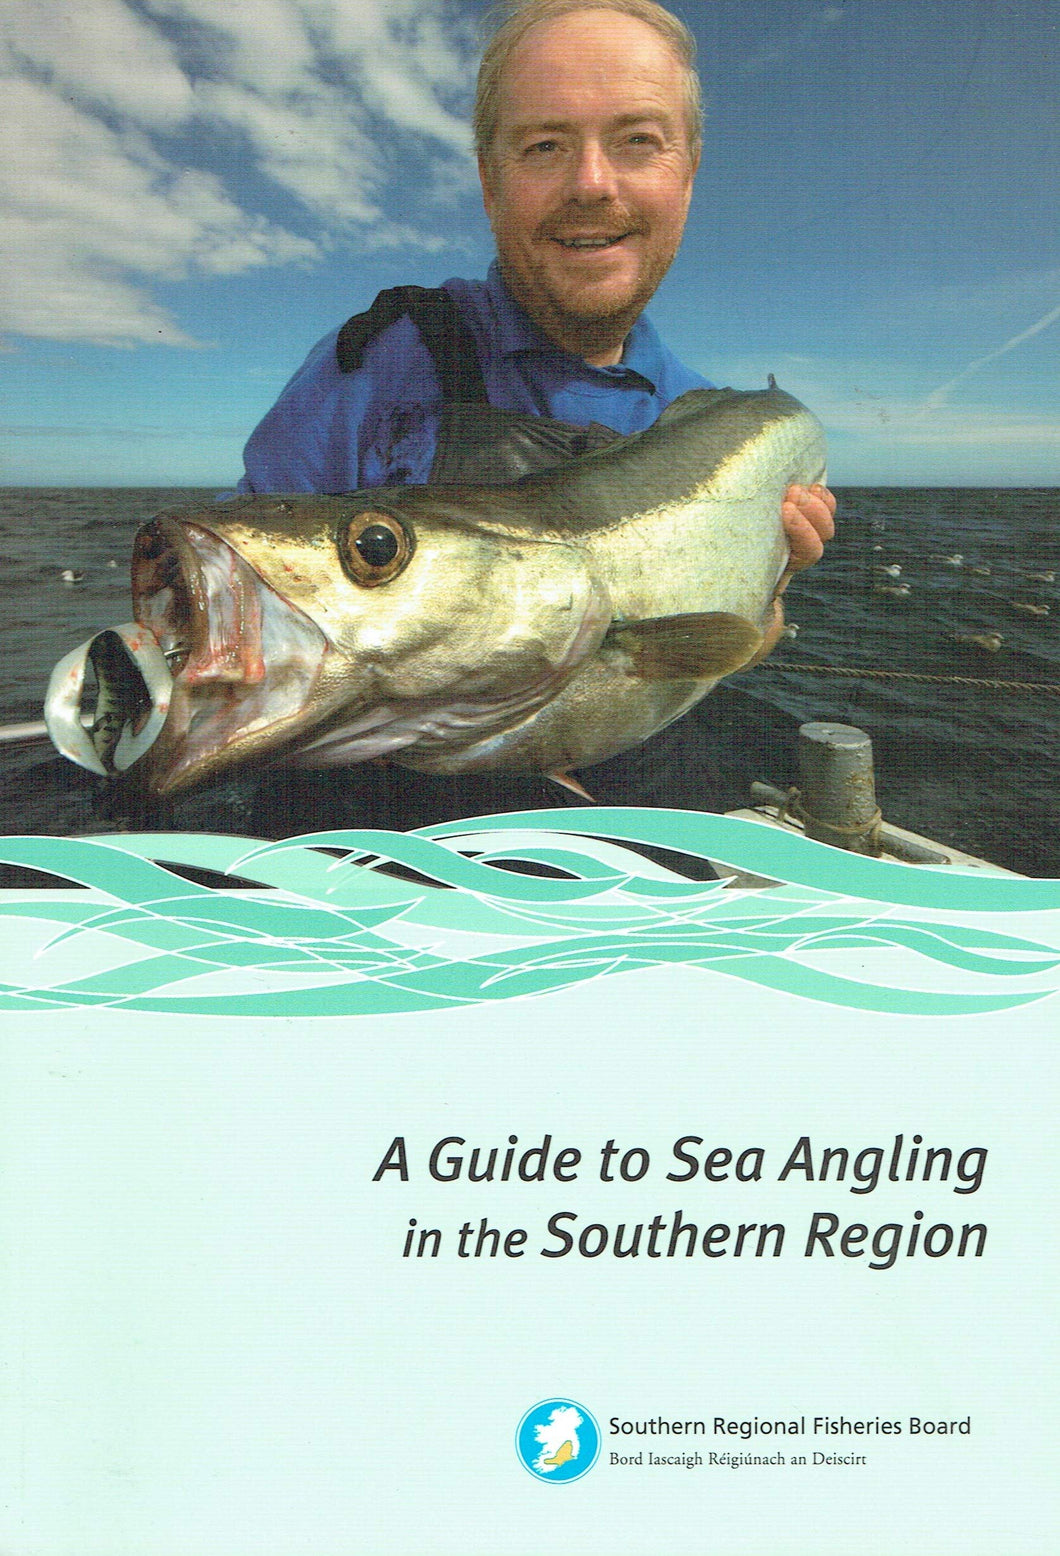 A Guide to Sea Angling in the Southern Region